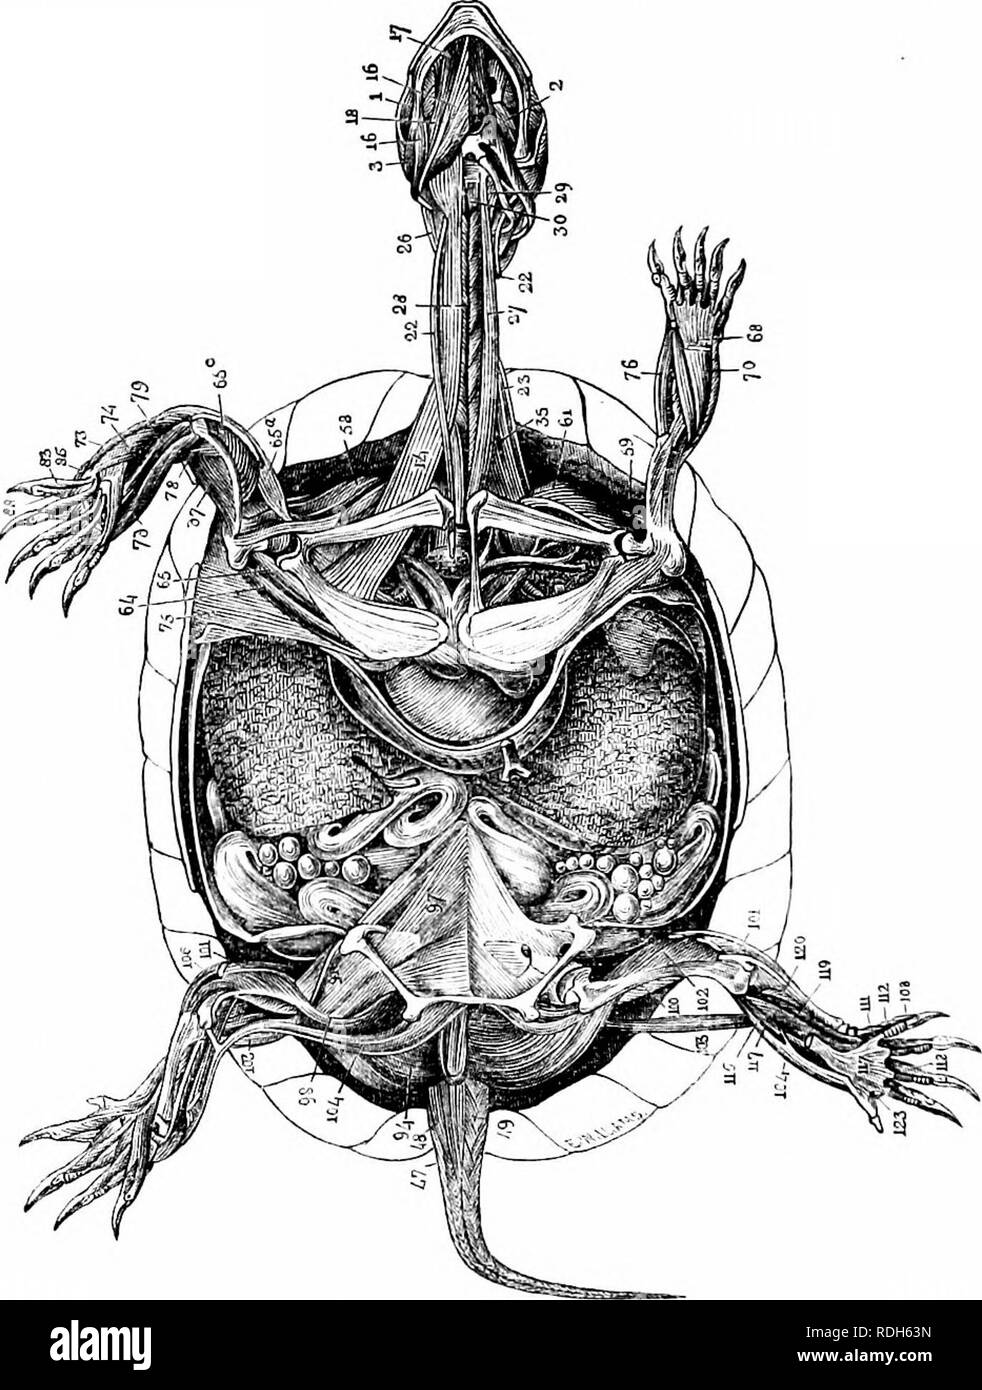 . On the anatomy of vertebrates. Vertebrates; Anatomy, Comparative; 1866. 236 ANATOMY OF VERTEBRATES. tubcB, fi&quot;&quot;S. 148, 149, 4, arises from the mastoid, and is inserted into the postero-inferior angle of the tympanic and into the begin- ning of the eustachian tube. The following are muscles of the hyoidean arch and appen- dages. The mylohyoideus, fig. 153, 13, extends transversely between the mandibular rami, and is attached to the hyoid by its median 152. raphe. The iniio/ii/Didnis, llgs. 150, 152, 14, arises from the coracoid, and is inserted into tlie basi-, cerato-, and thyro-hy Stock Photo